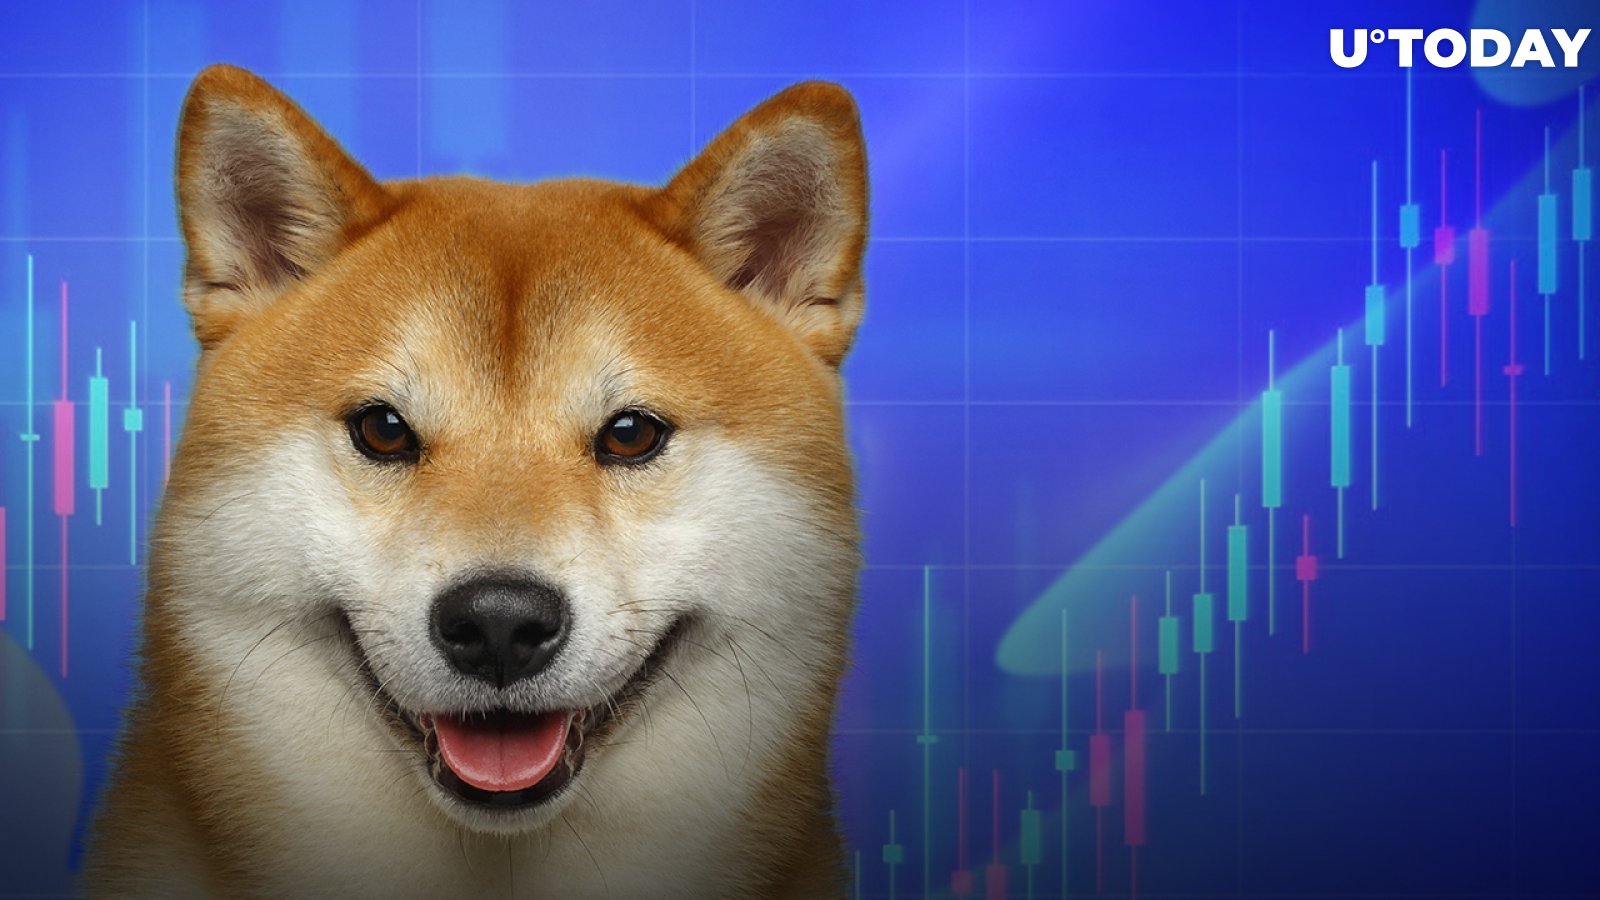 Here's When Shiba Inu's Price Will Start Moving with Higher Volatility, According to Charts